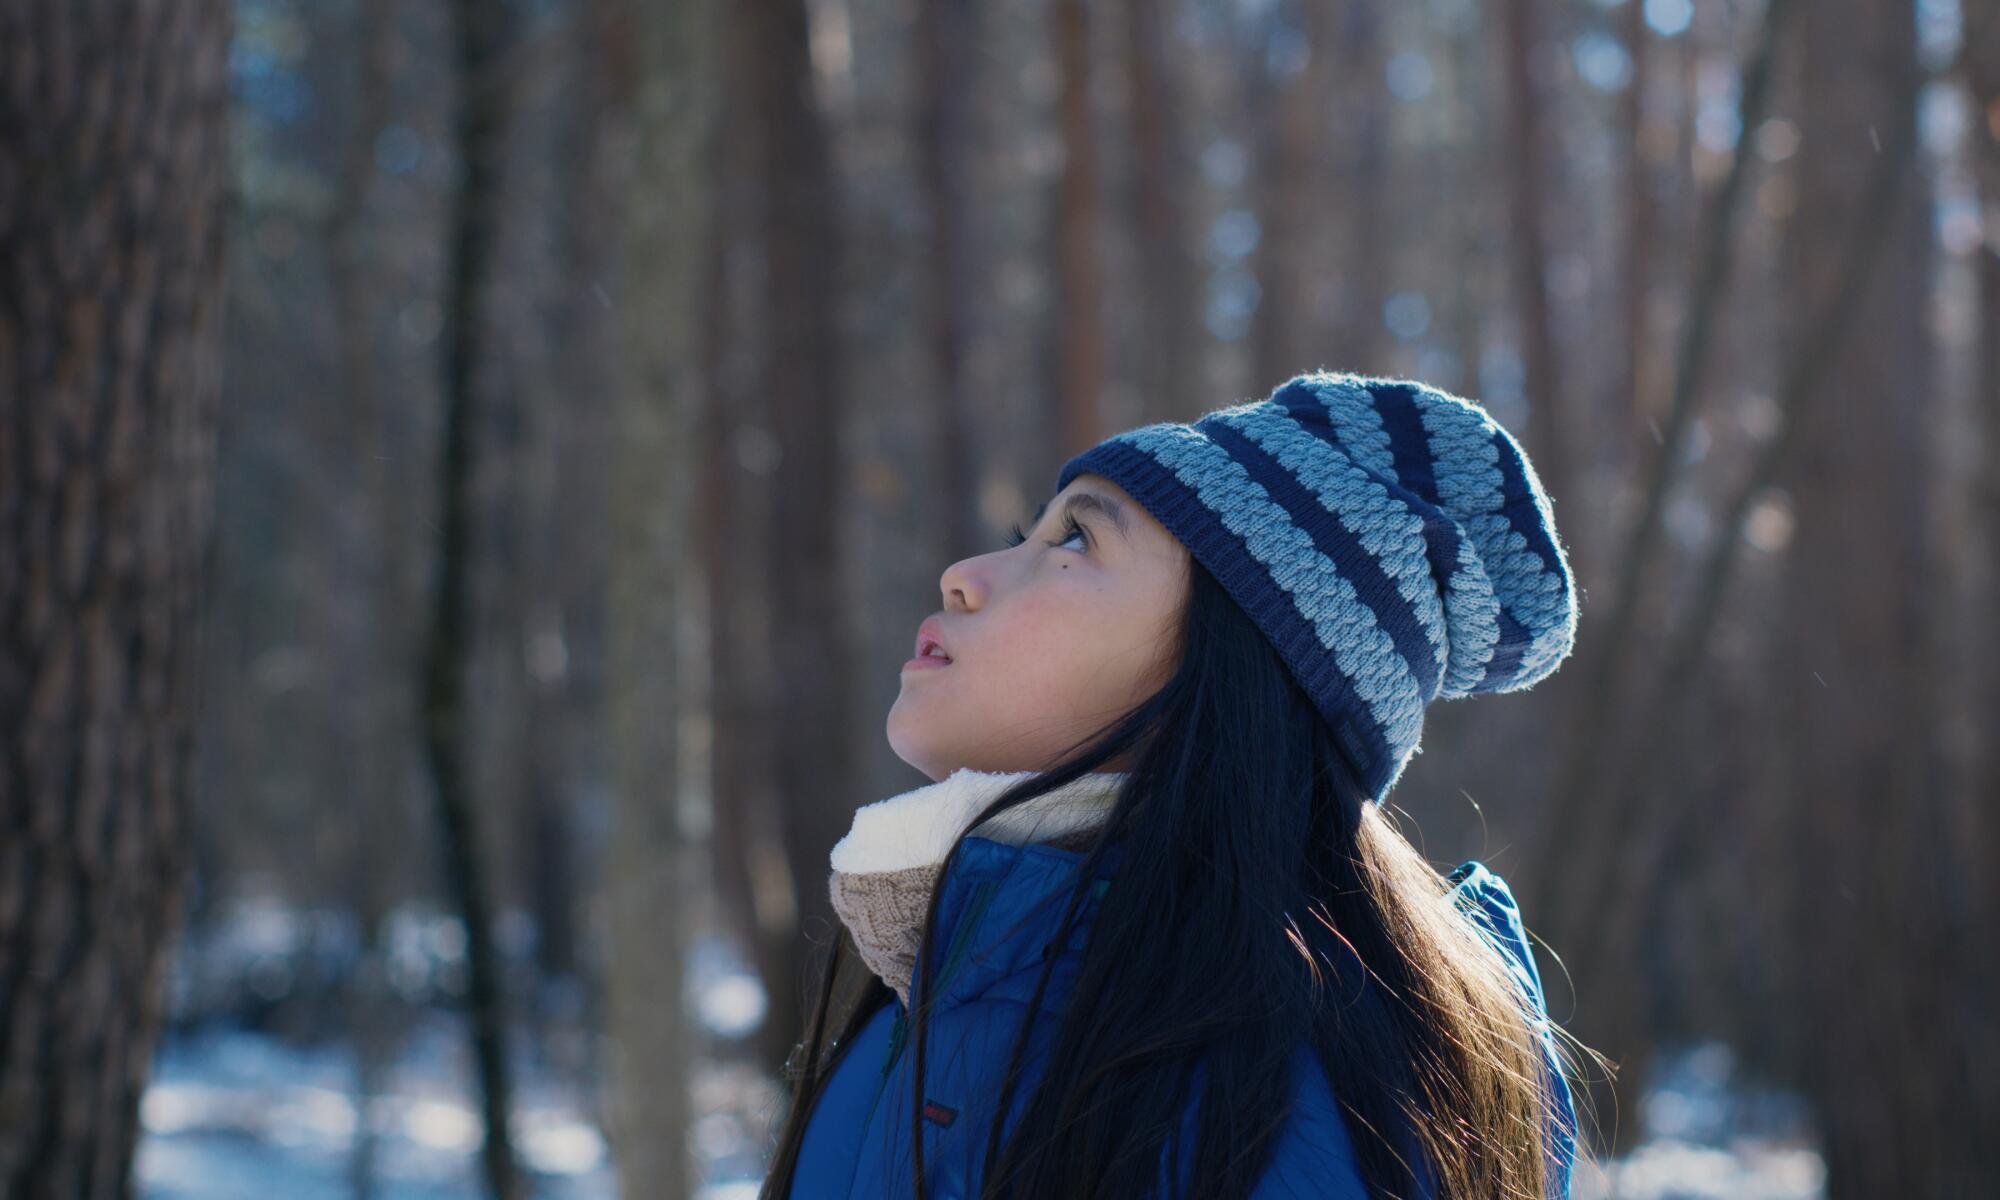 A girl in the forest in a knitted hat looks up.